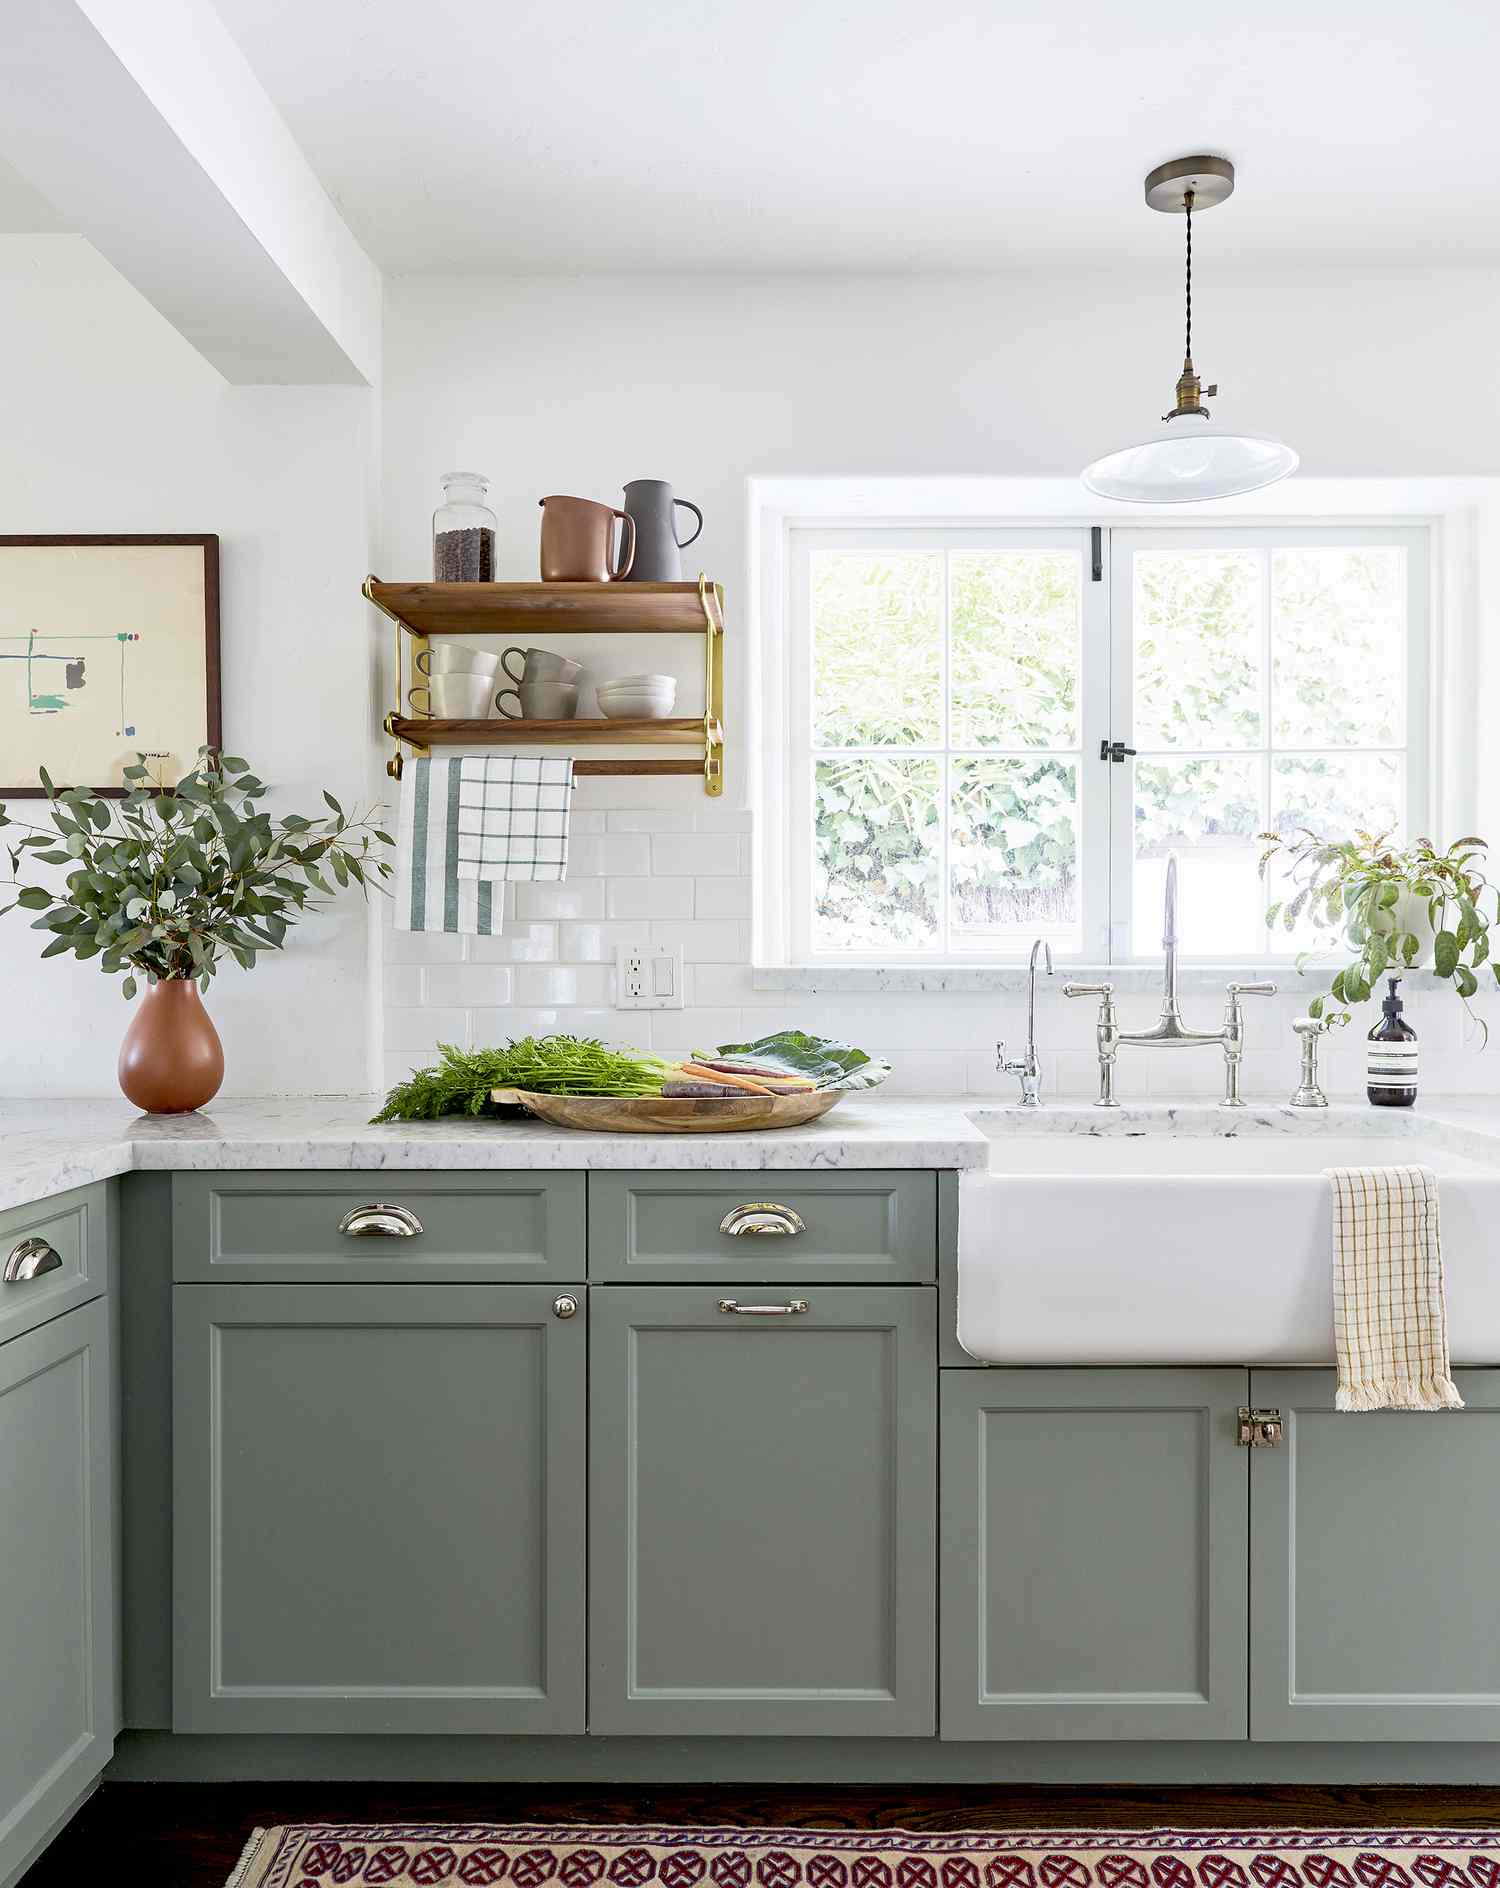 Kitchen styled by Emily Edith Bowser, designed by Sarah E Zachary